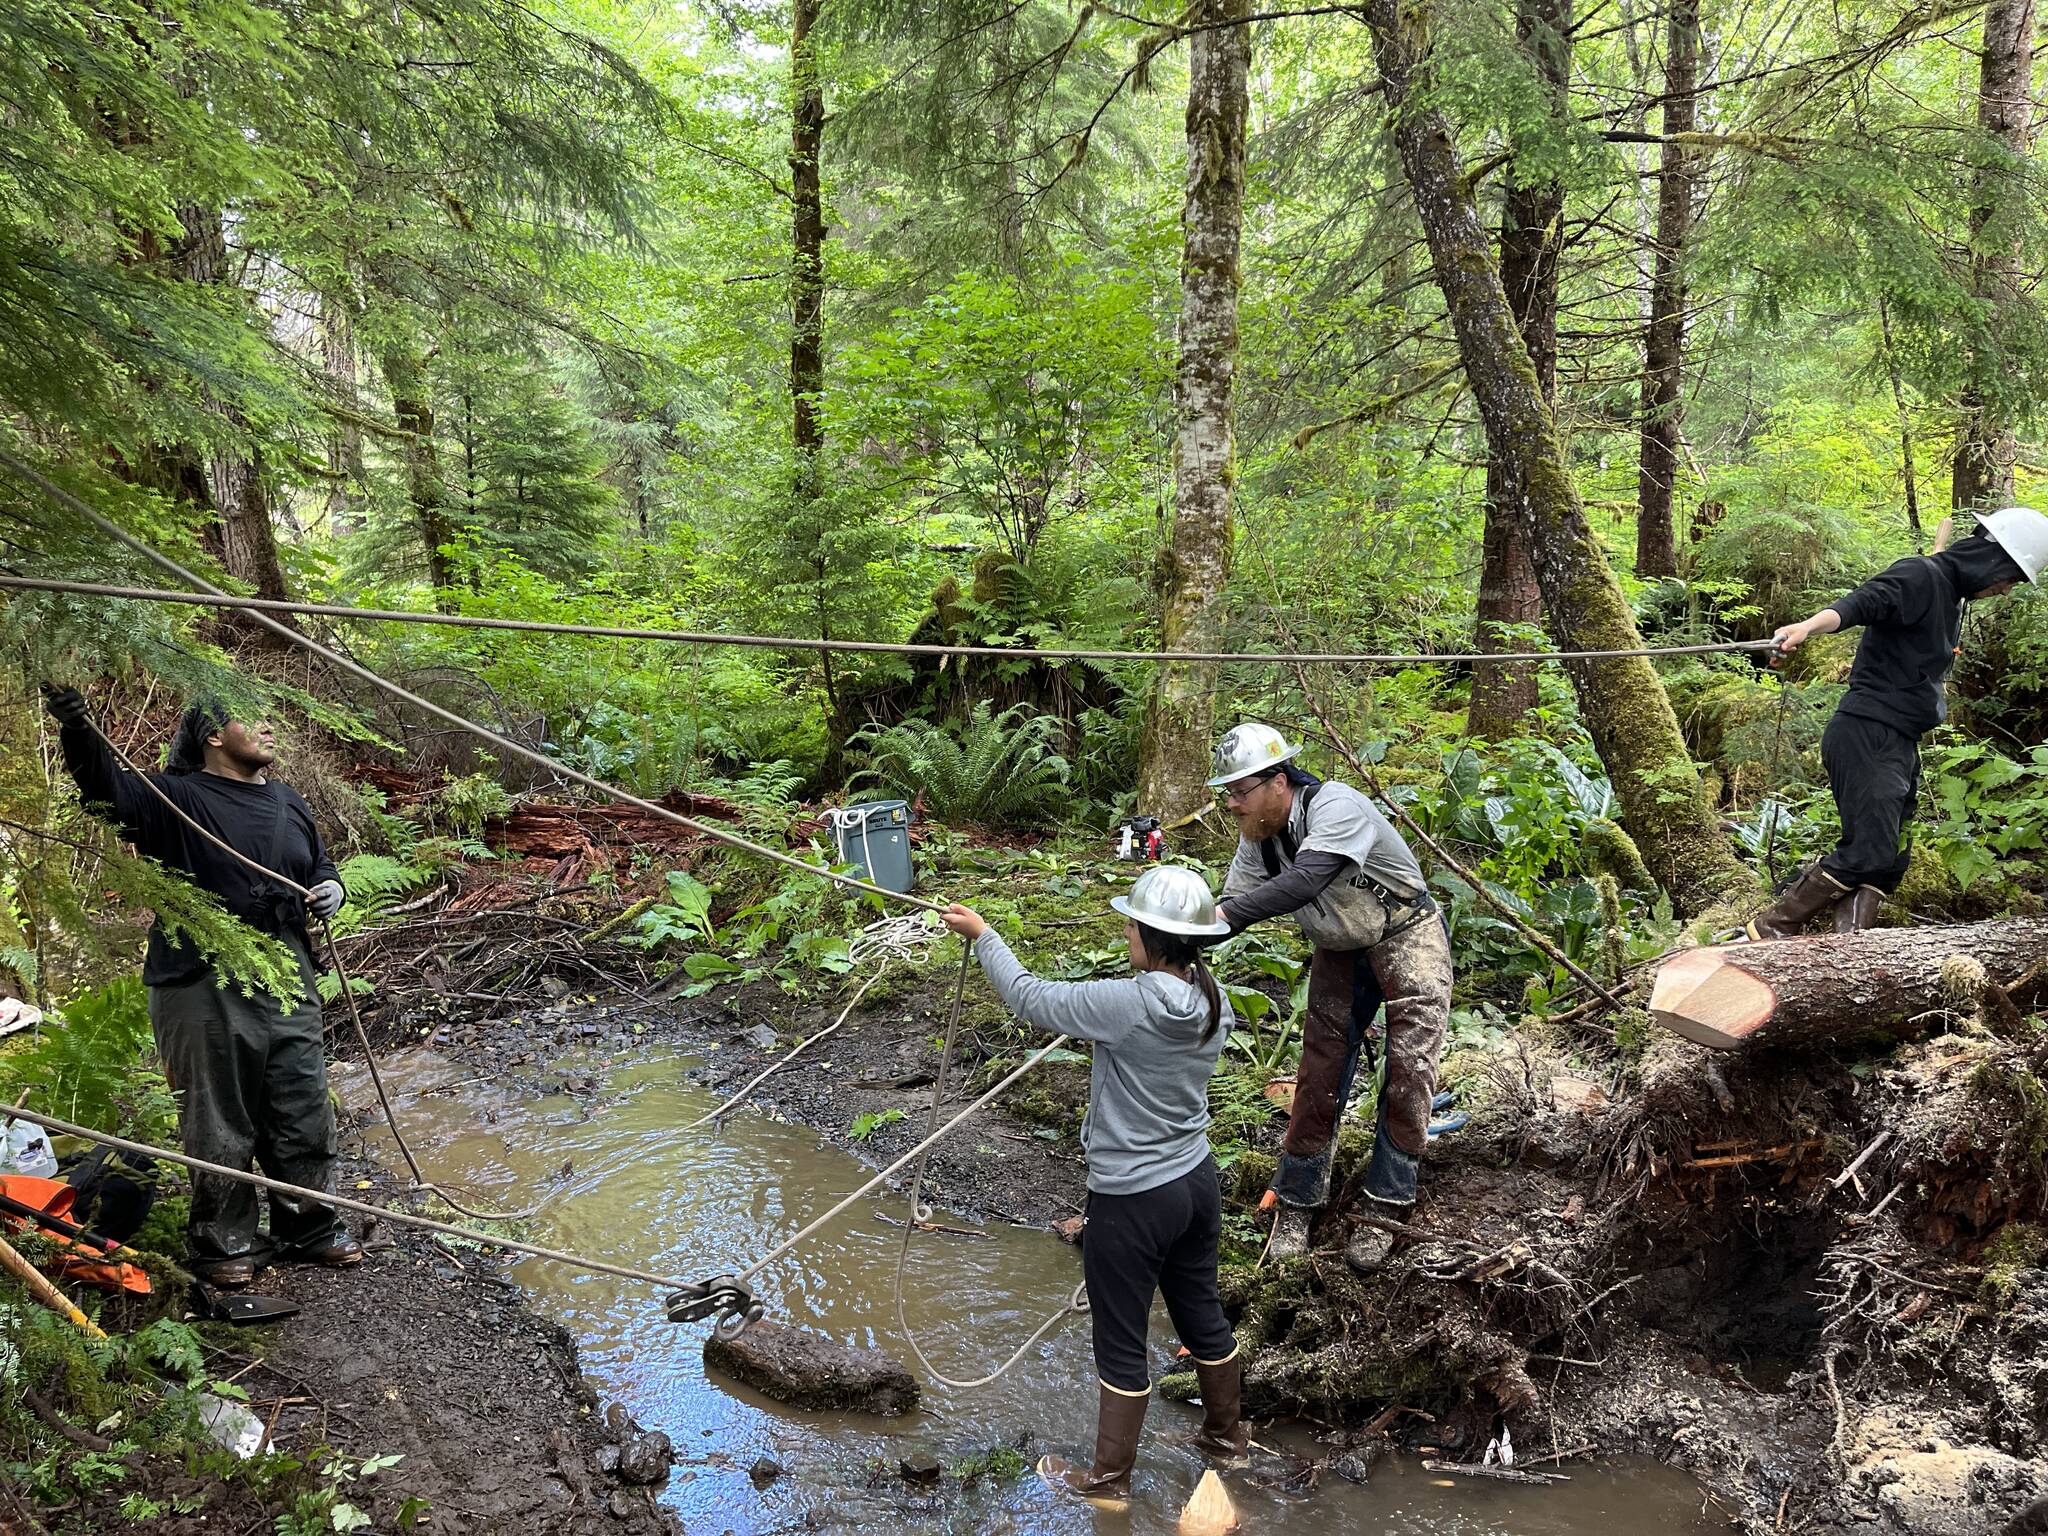 Caption: AYS students Allison Mills and Ricardo Sanchez help Quinn Aboudara rig a system to haul a log into 2.5 Mile Creek as a part of the crew’s stream restoration work (Courtesy Photo / John Hudson, SAWC)